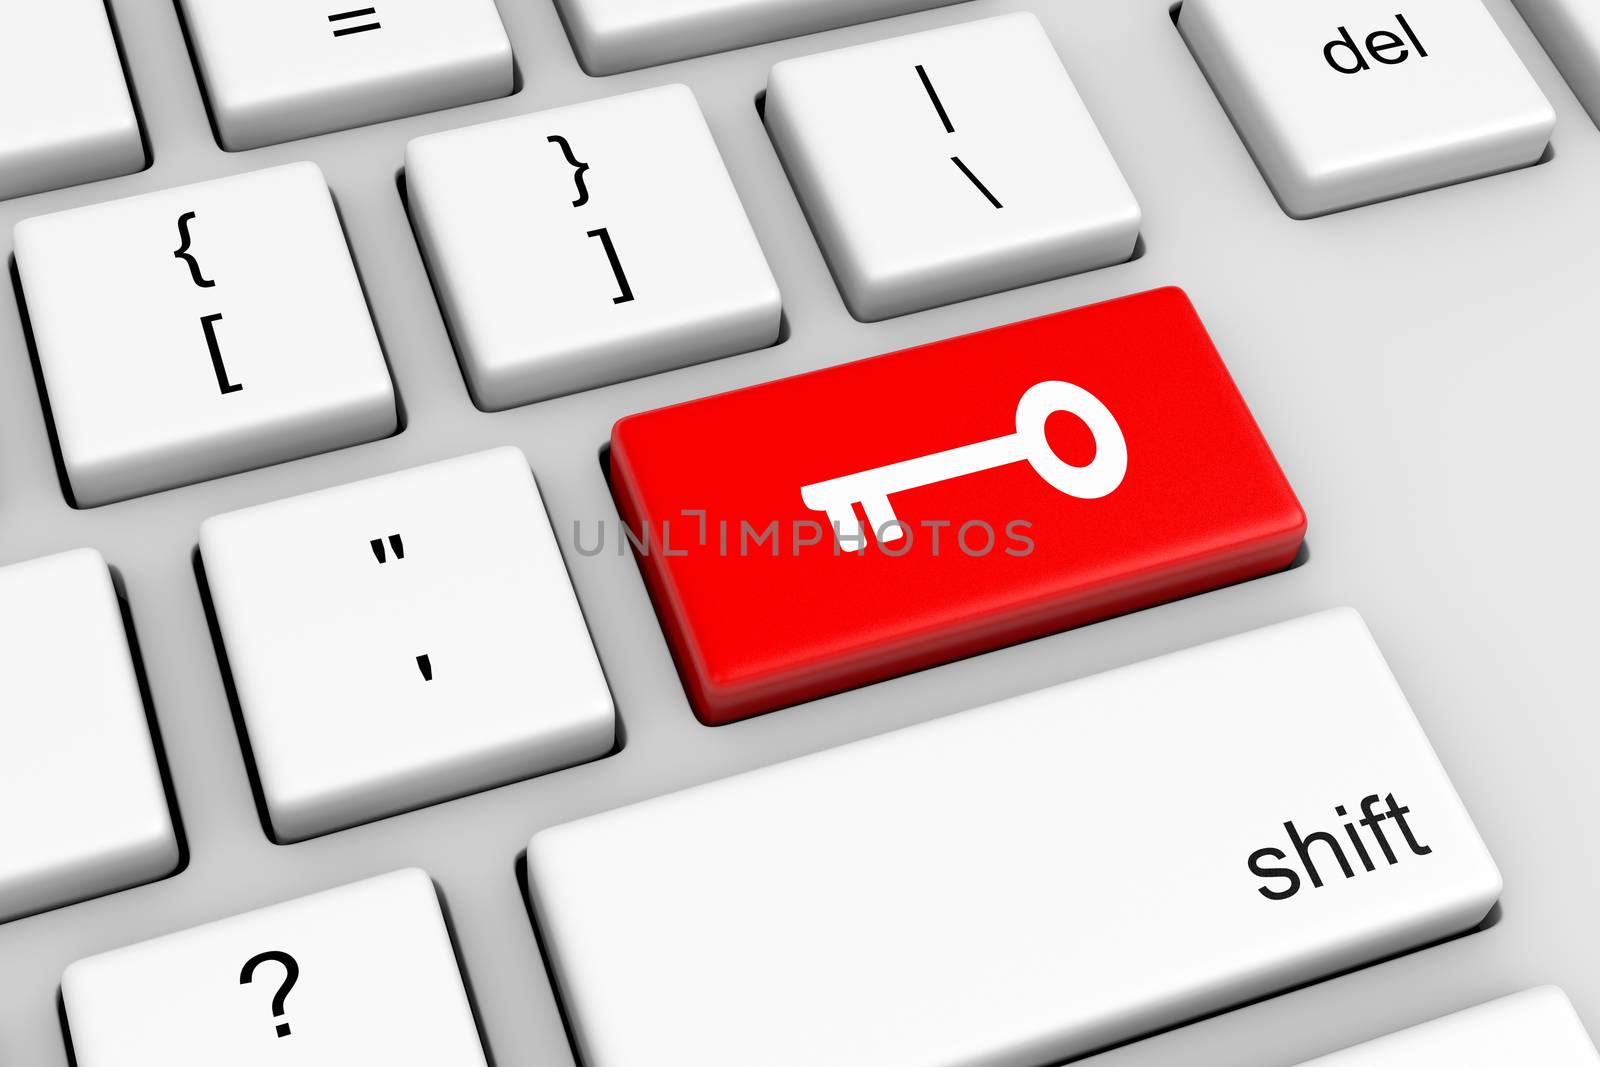 Computer Keyboard with Red Access Key Button Illustration